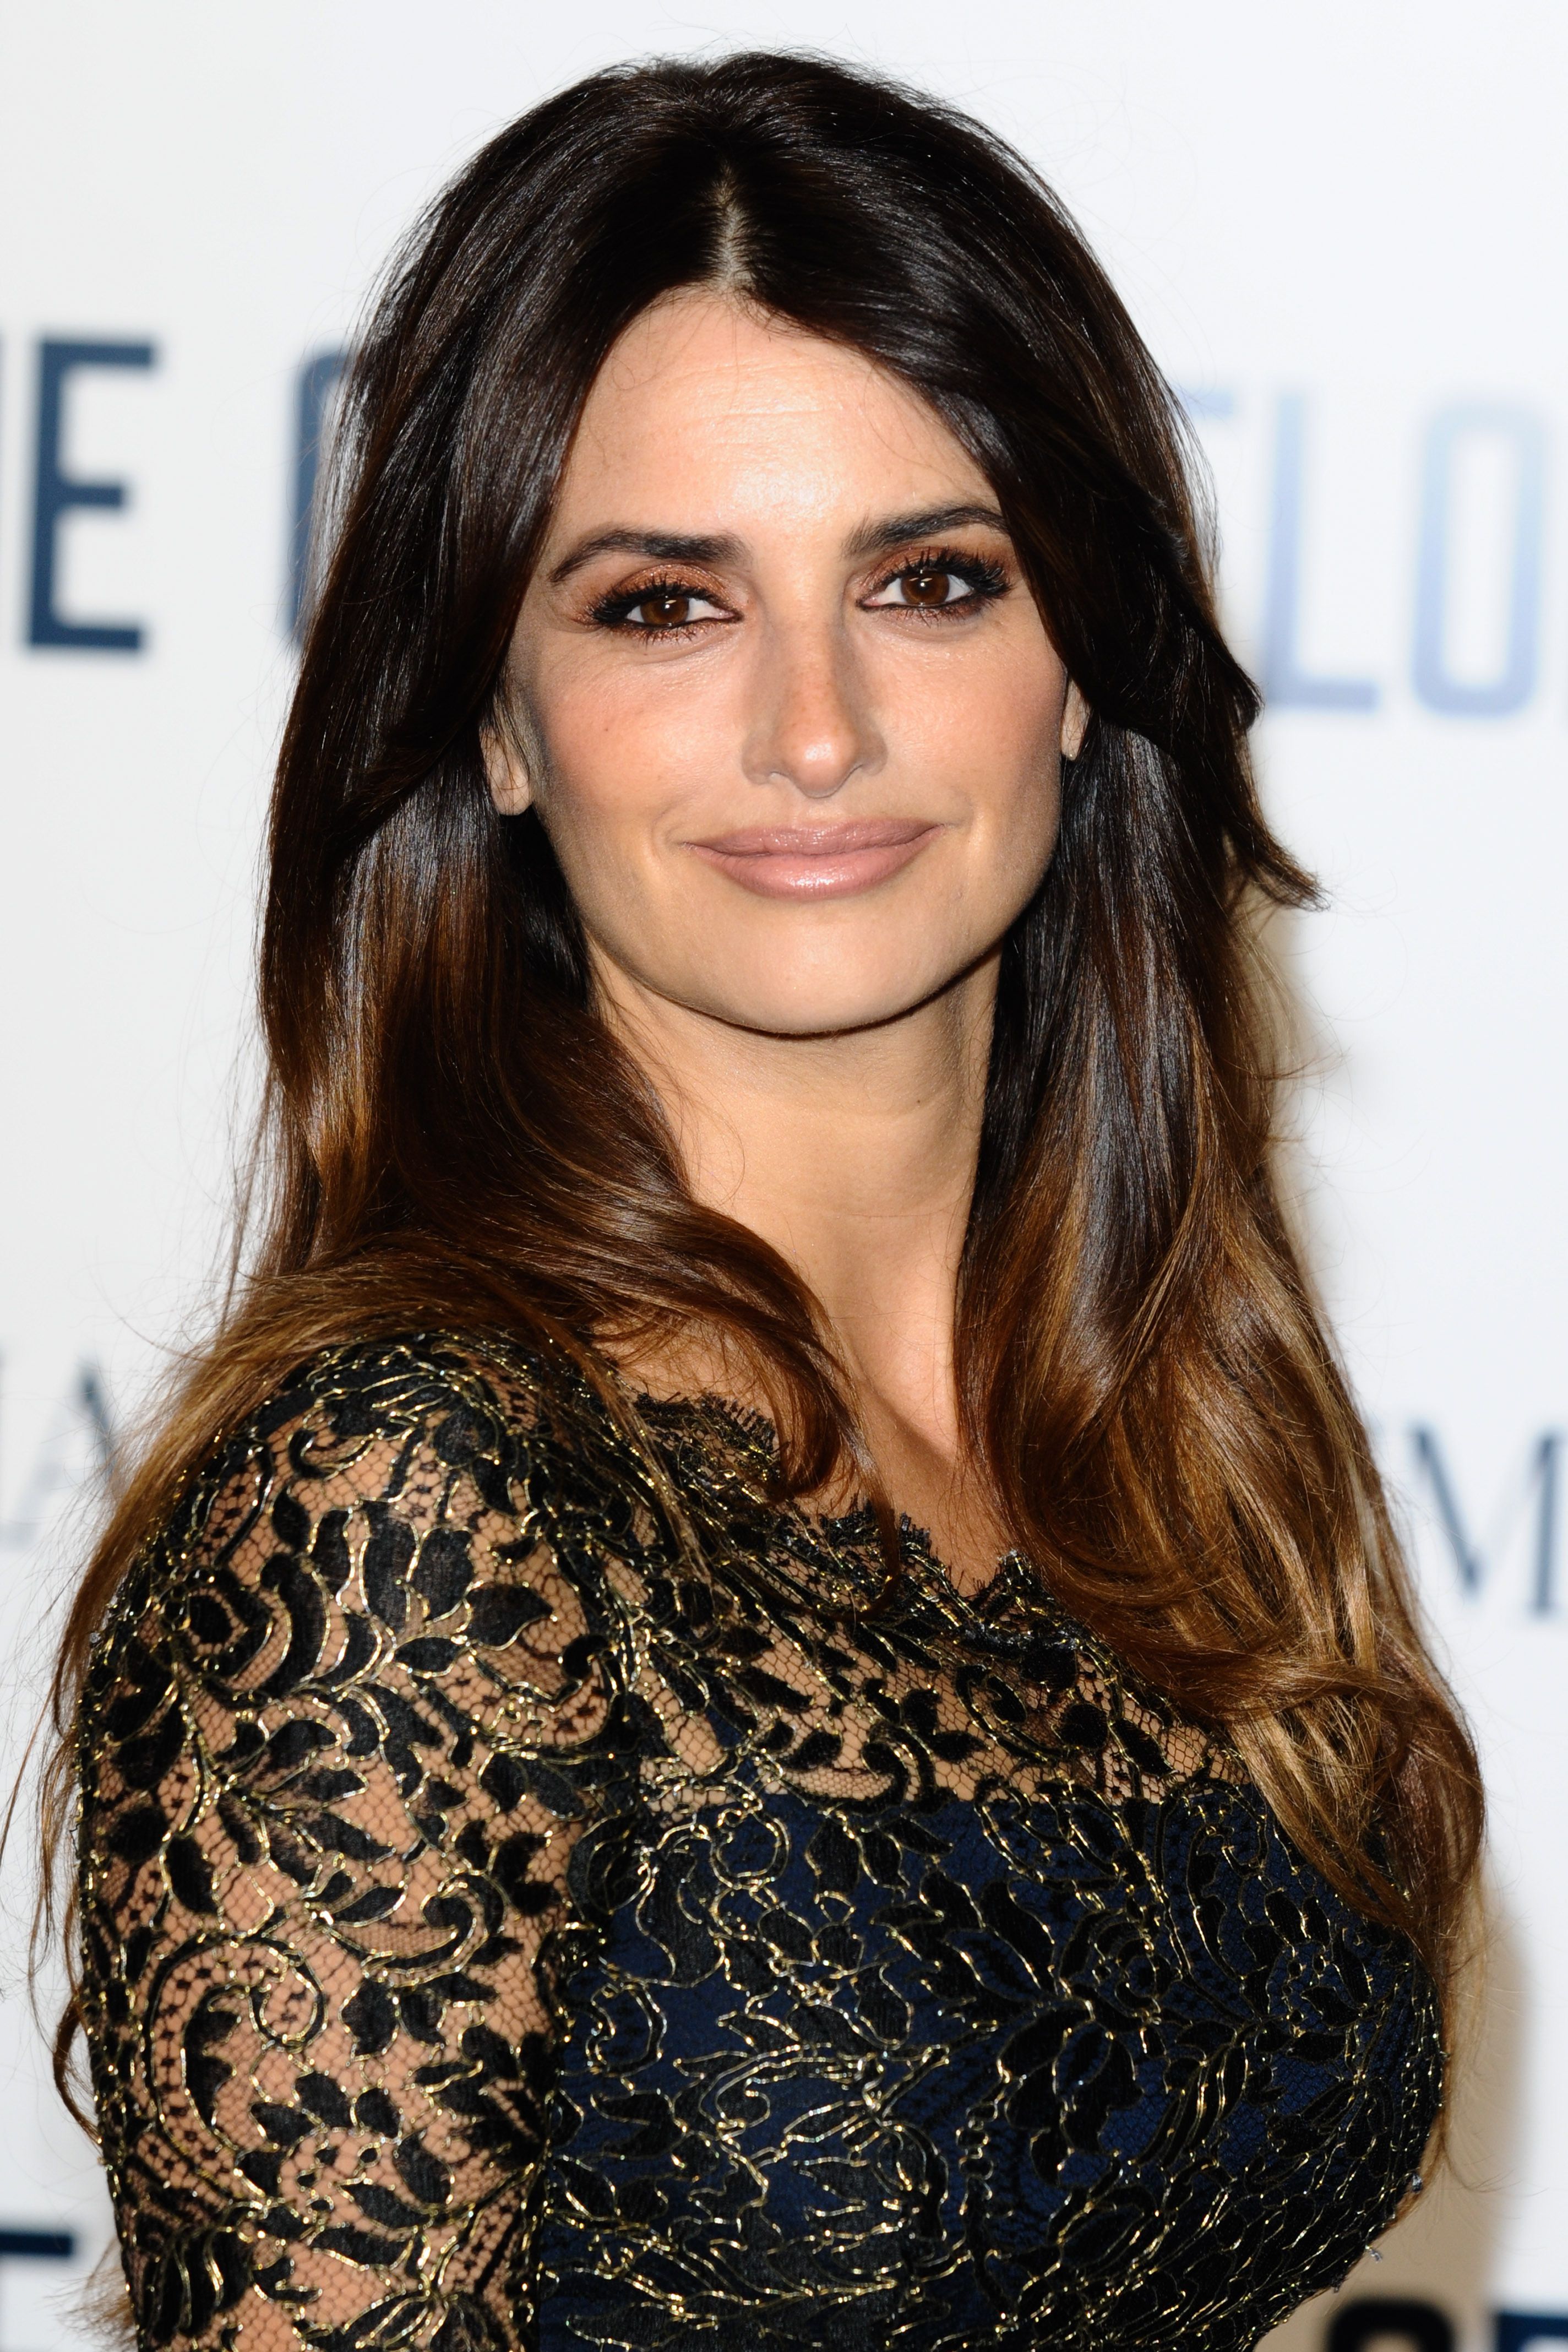 Penelope Cruz wears a lace dress with her hair down.